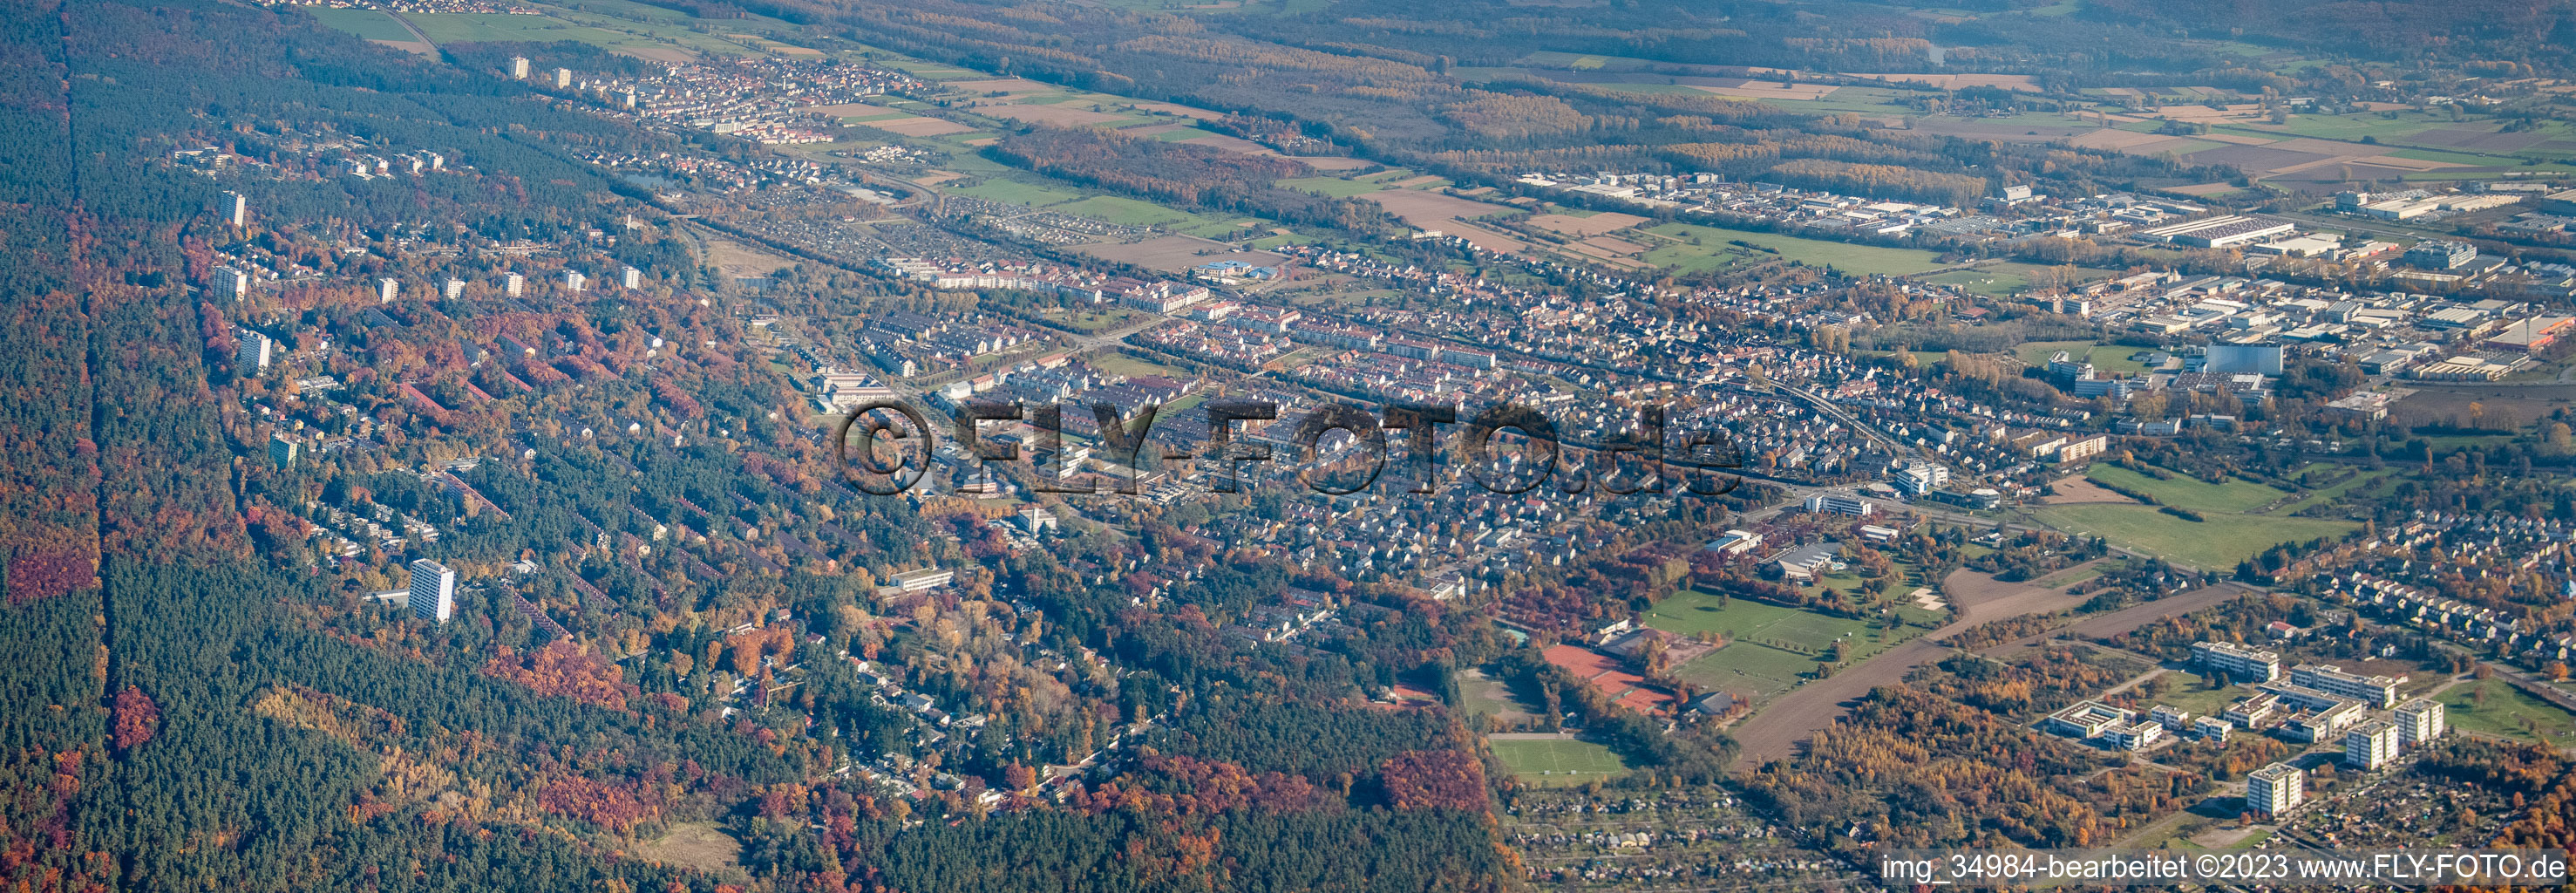 District Waldstadt in Karlsruhe in the state Baden-Wuerttemberg, Germany